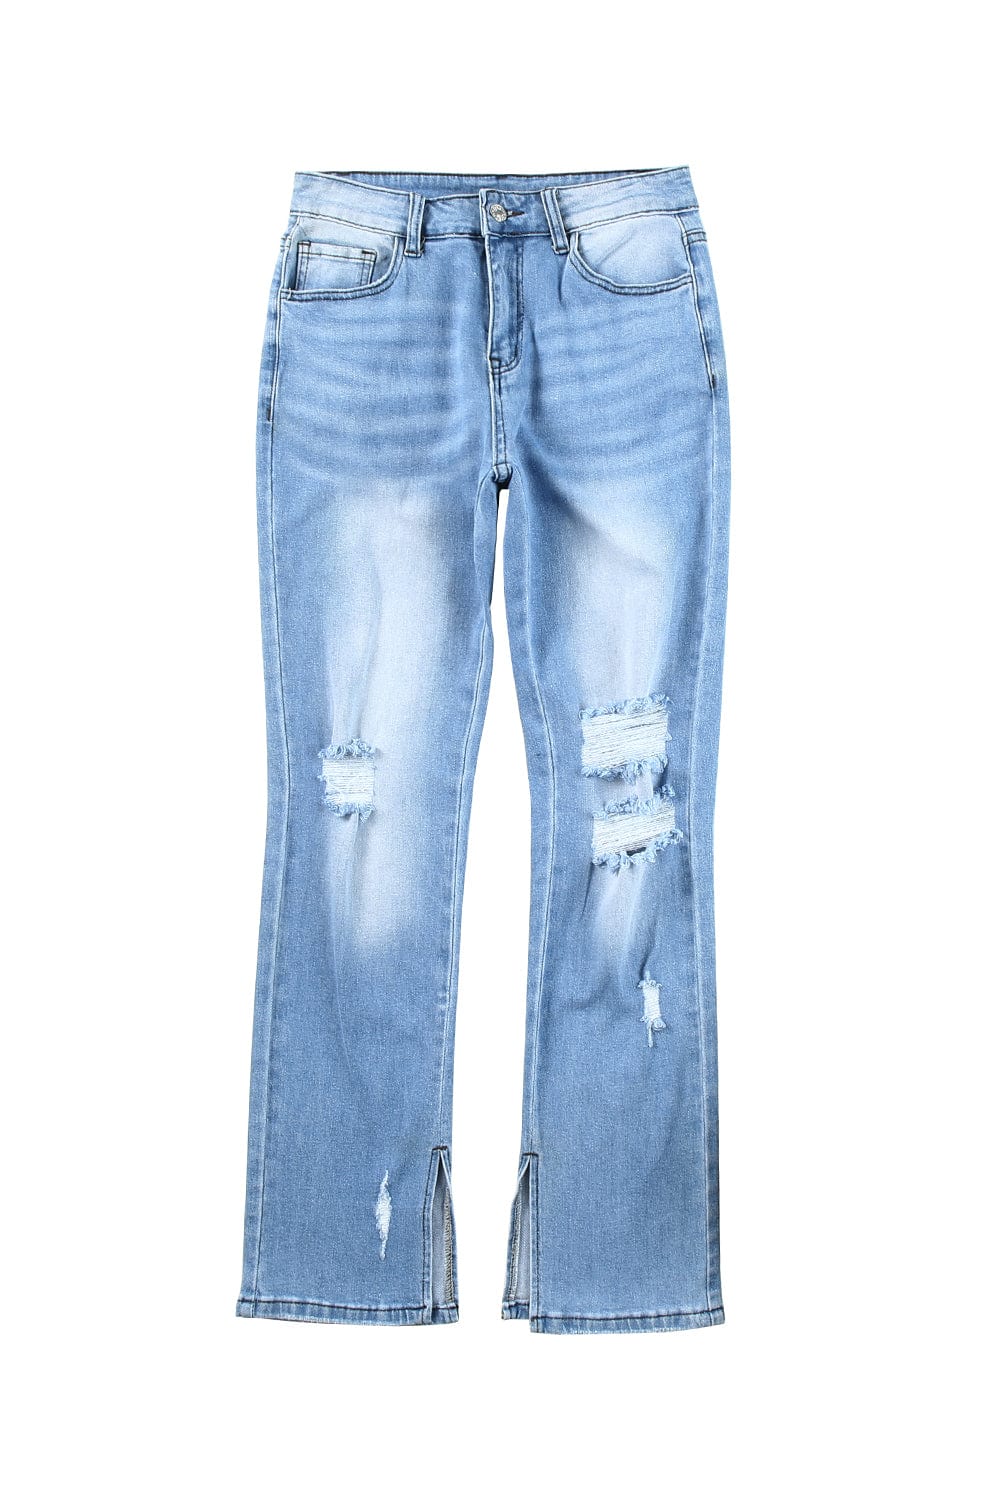 The802Gypsy  pants TRAVELING GYPSY-Straight Leg High Waist Jeans